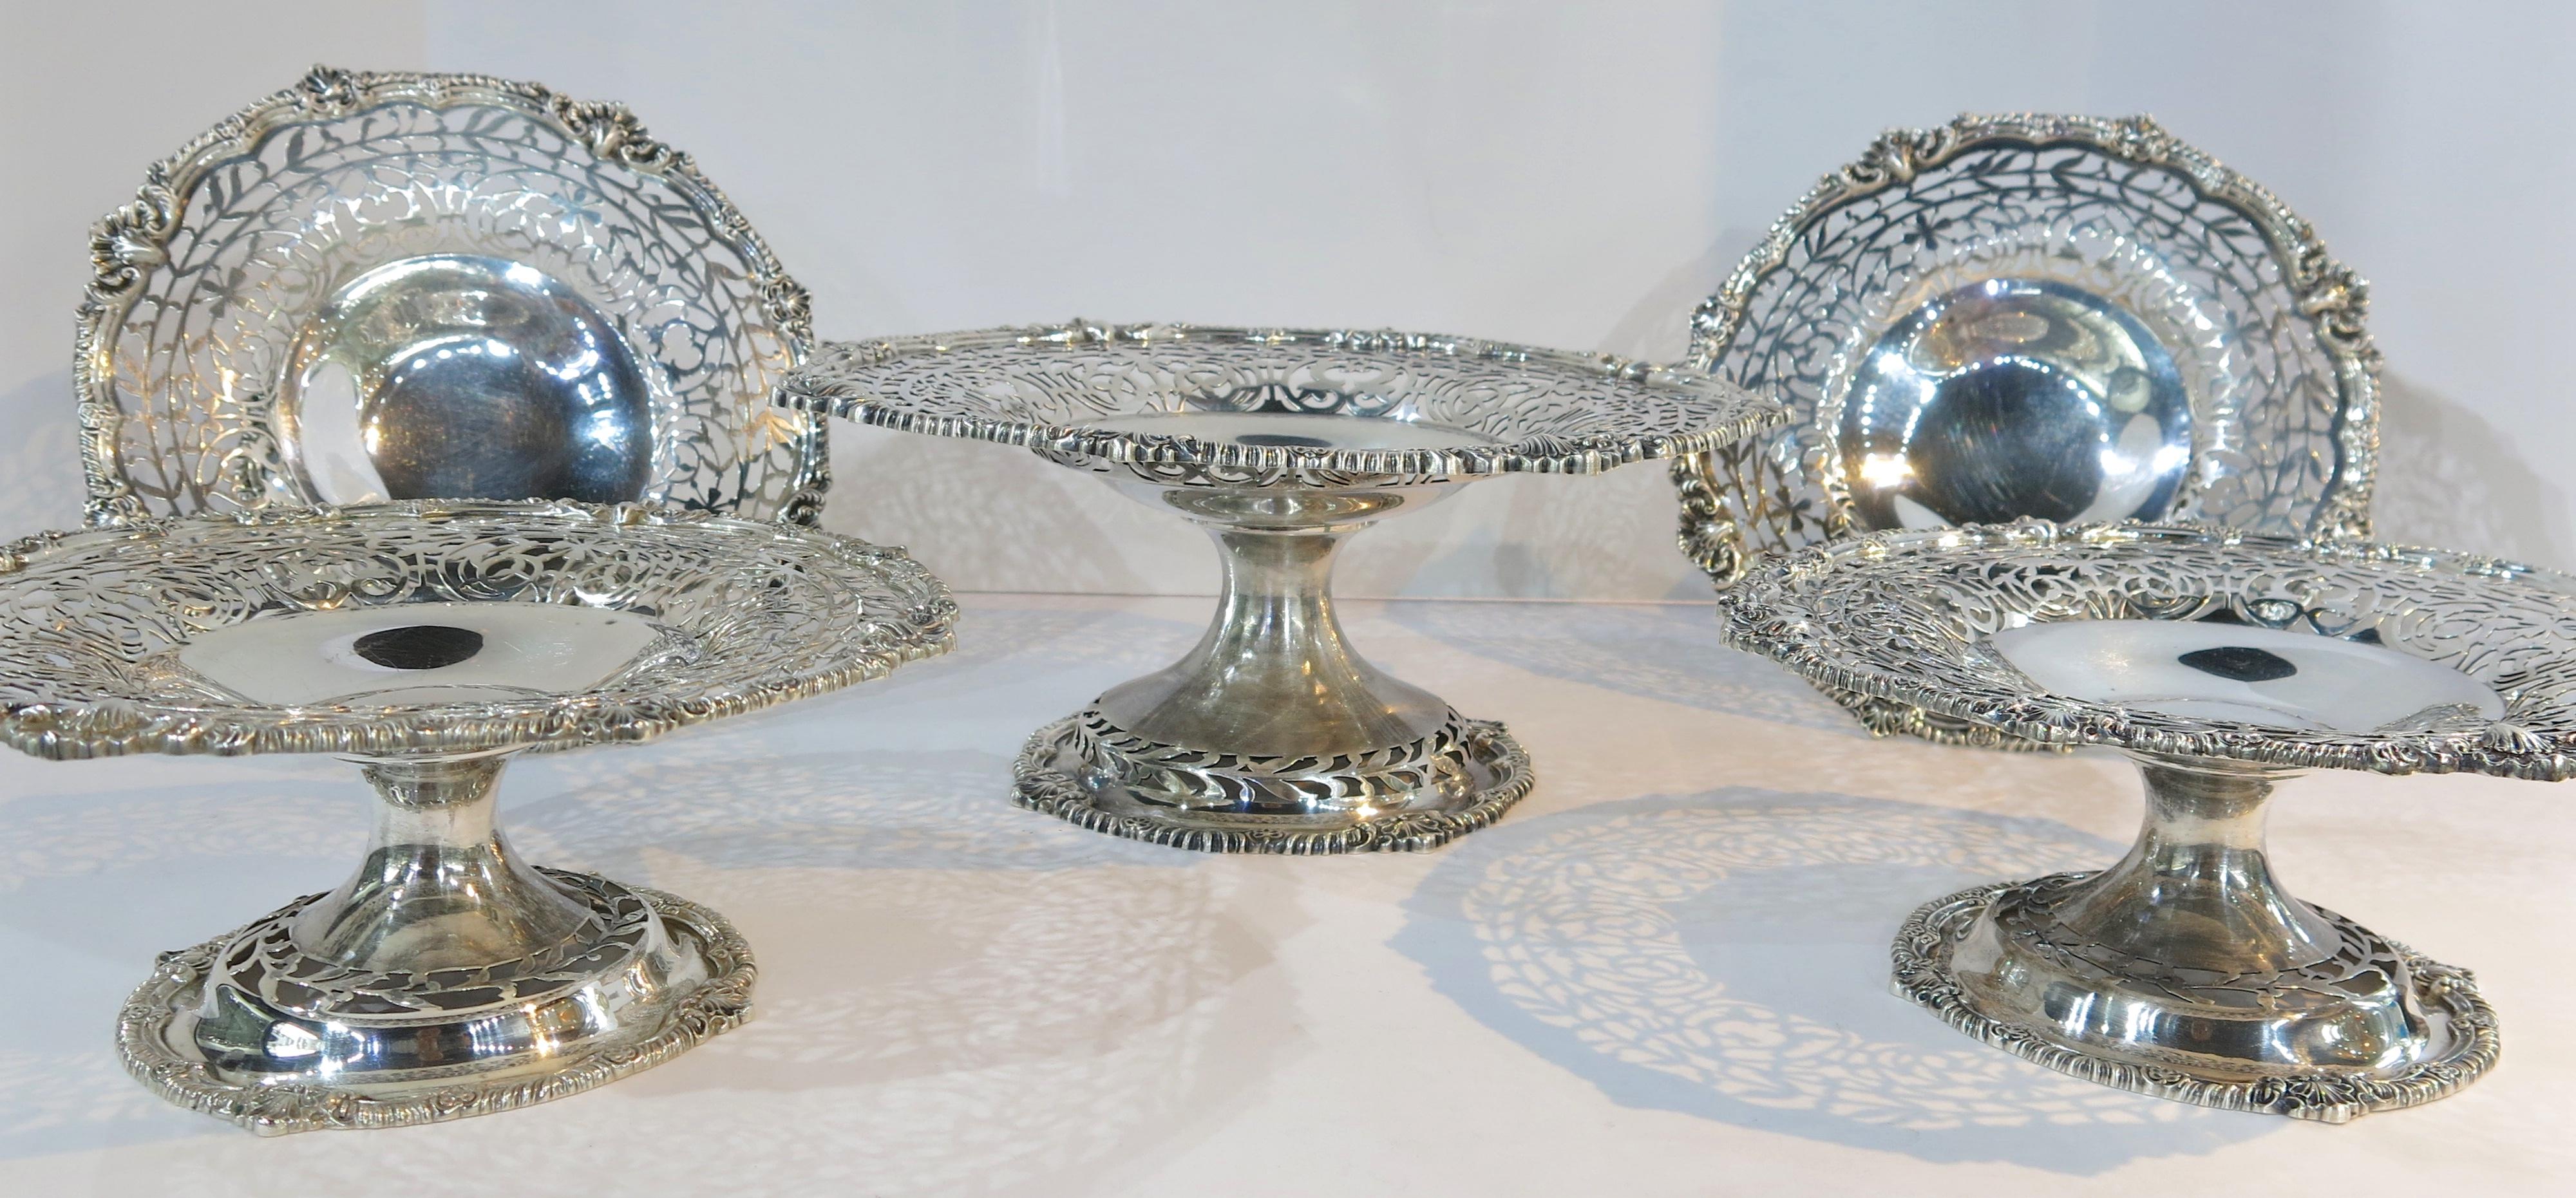 Antique suite of five sterling silver Taza, consisting of one large dish and four smaller to match. All are with a cast shell & gadroon border on the rim of the dish and on the rim of the pedestal foot. The main part of the dish is beautifully